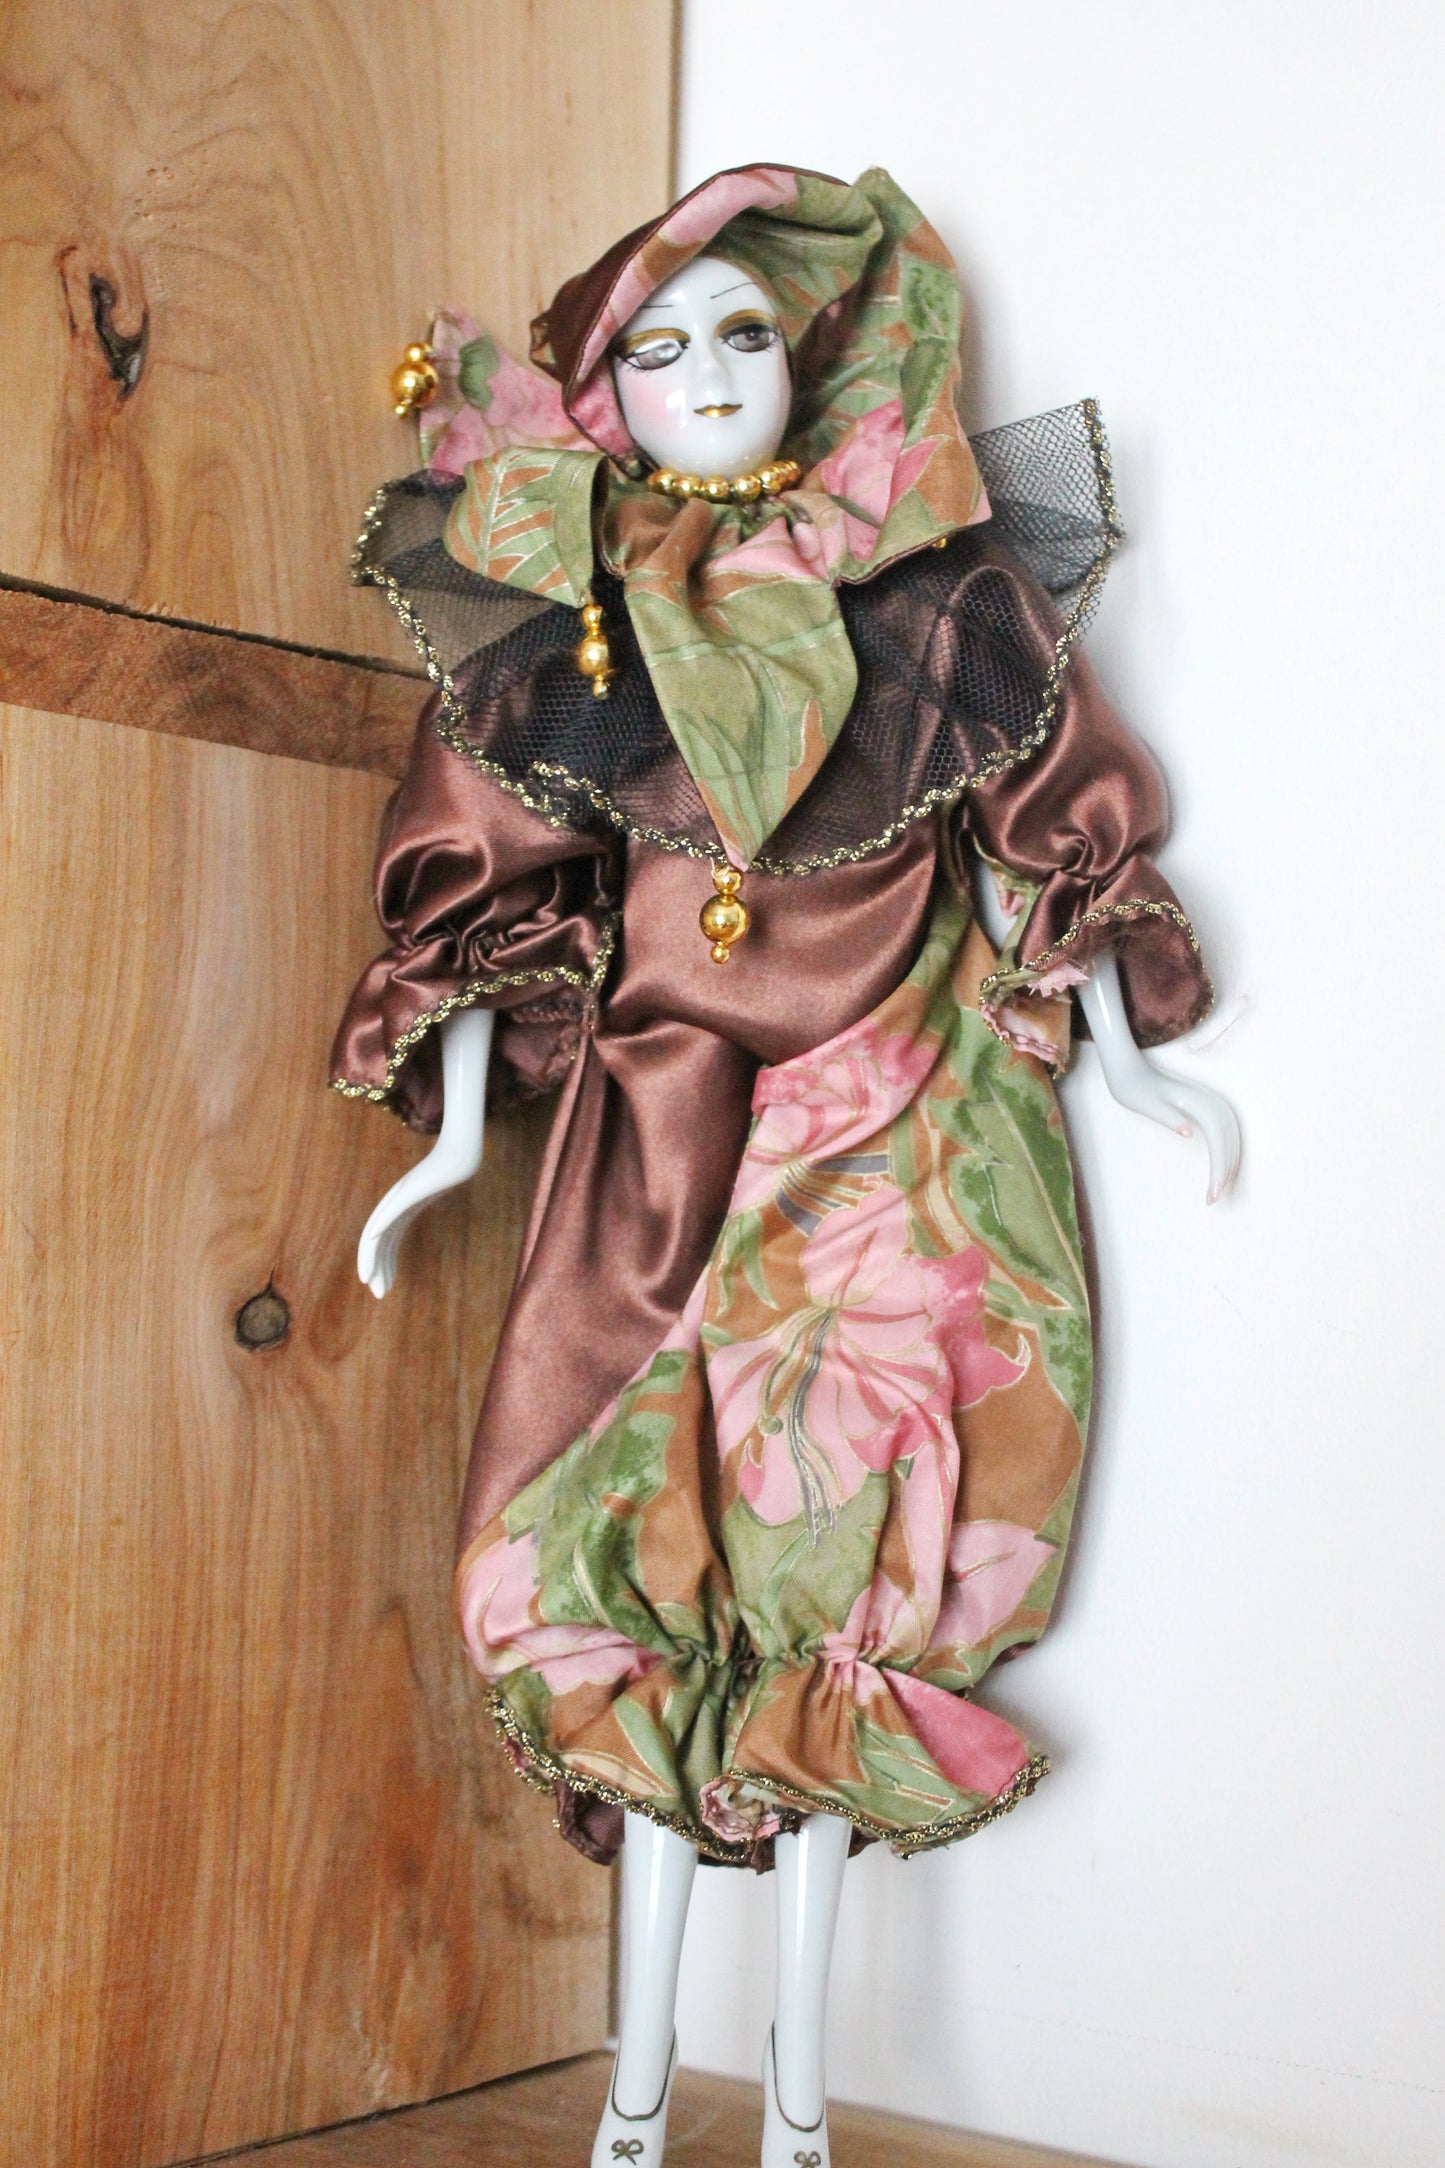 Vintage porcelain Venetian beautiful doll - Harlequin - 15.7 inches- collectible doll - porcelain doll - decor doll - 1980s